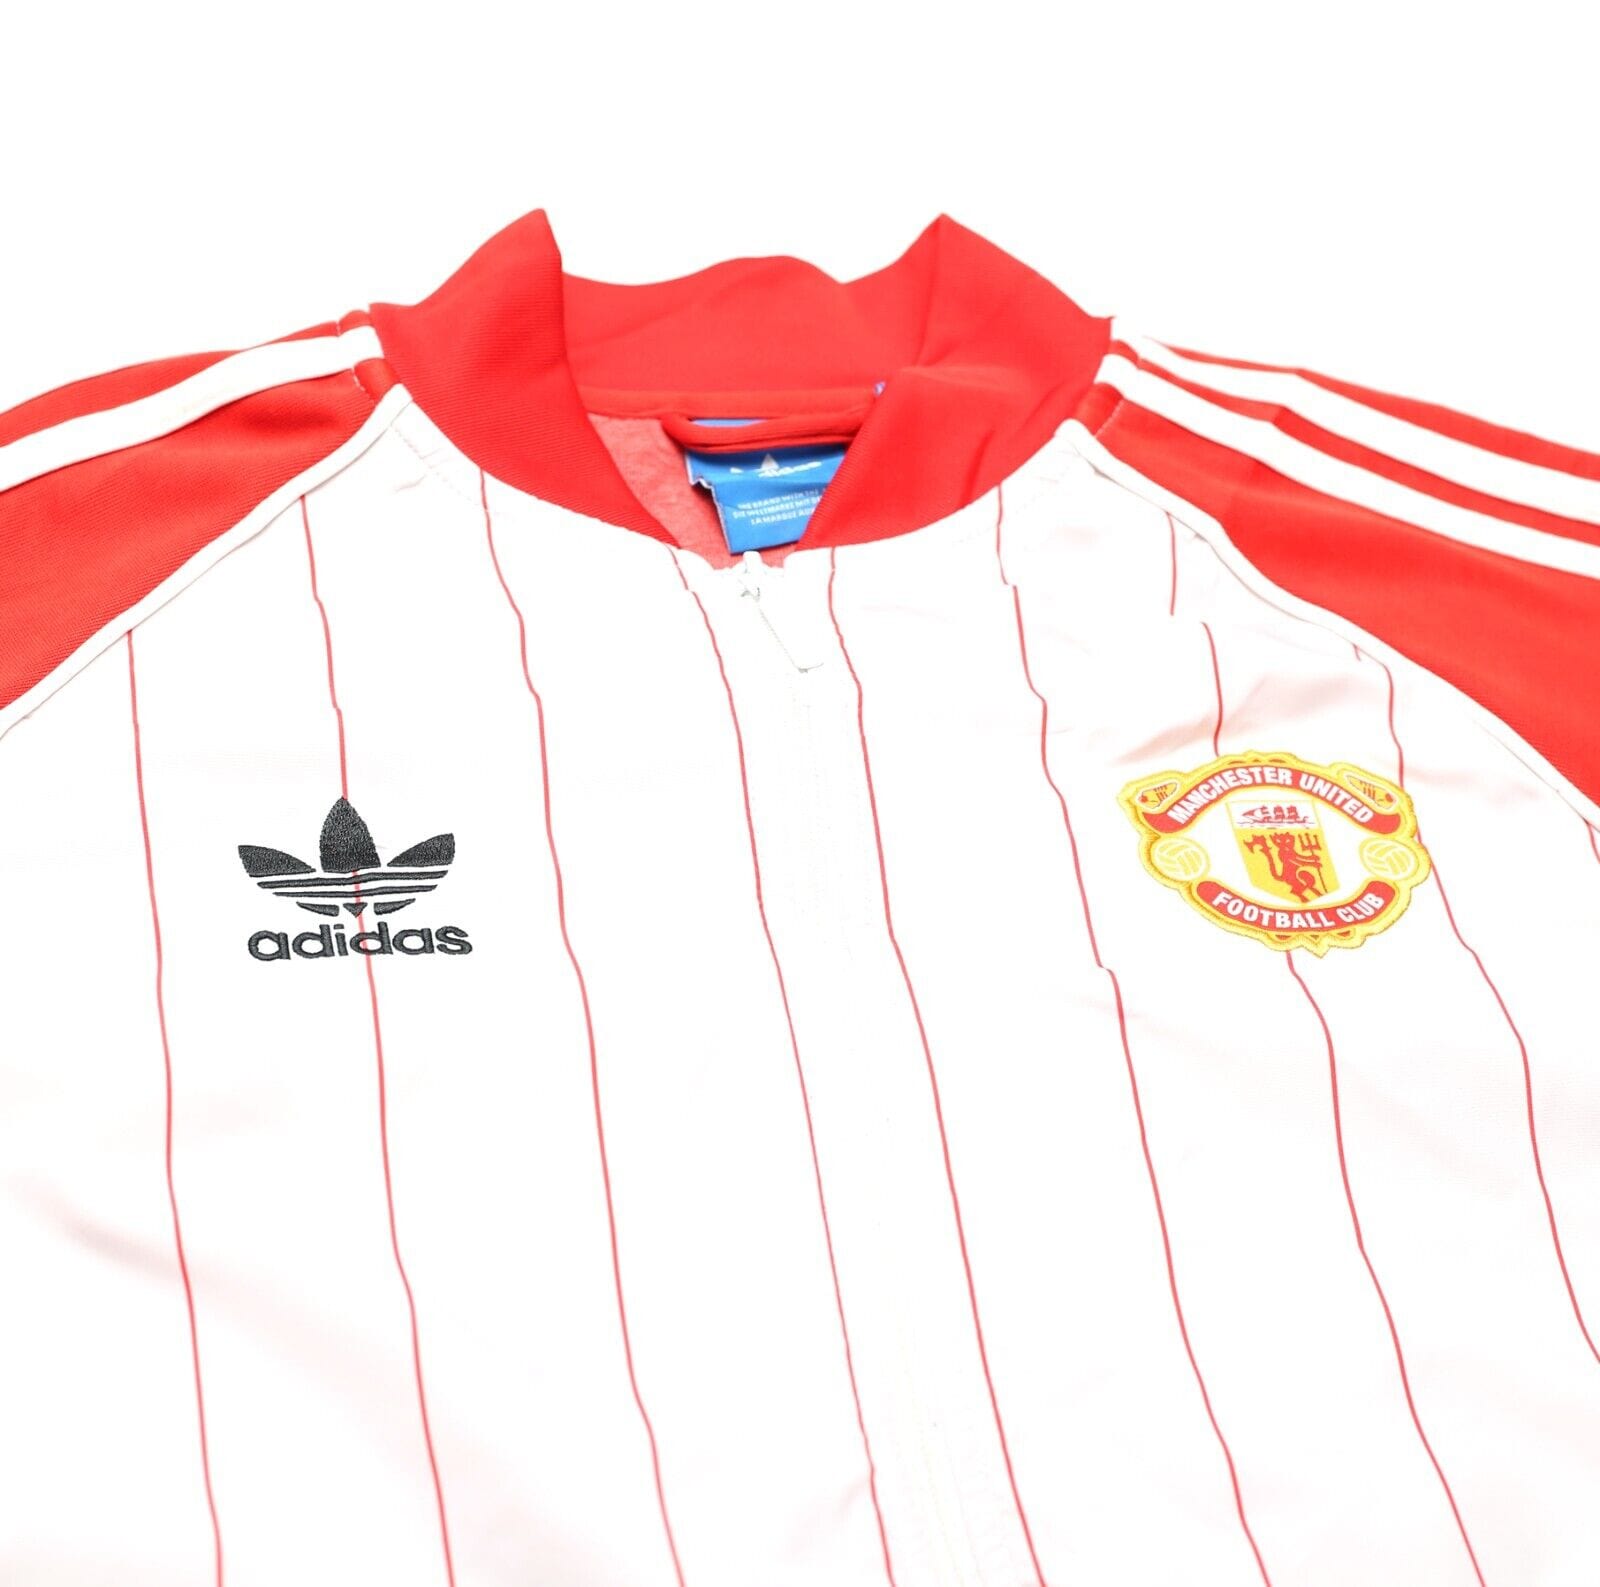 1980's Style MANCHESTER UNITED adidas Originals Football Track Top Jacket (M/L)